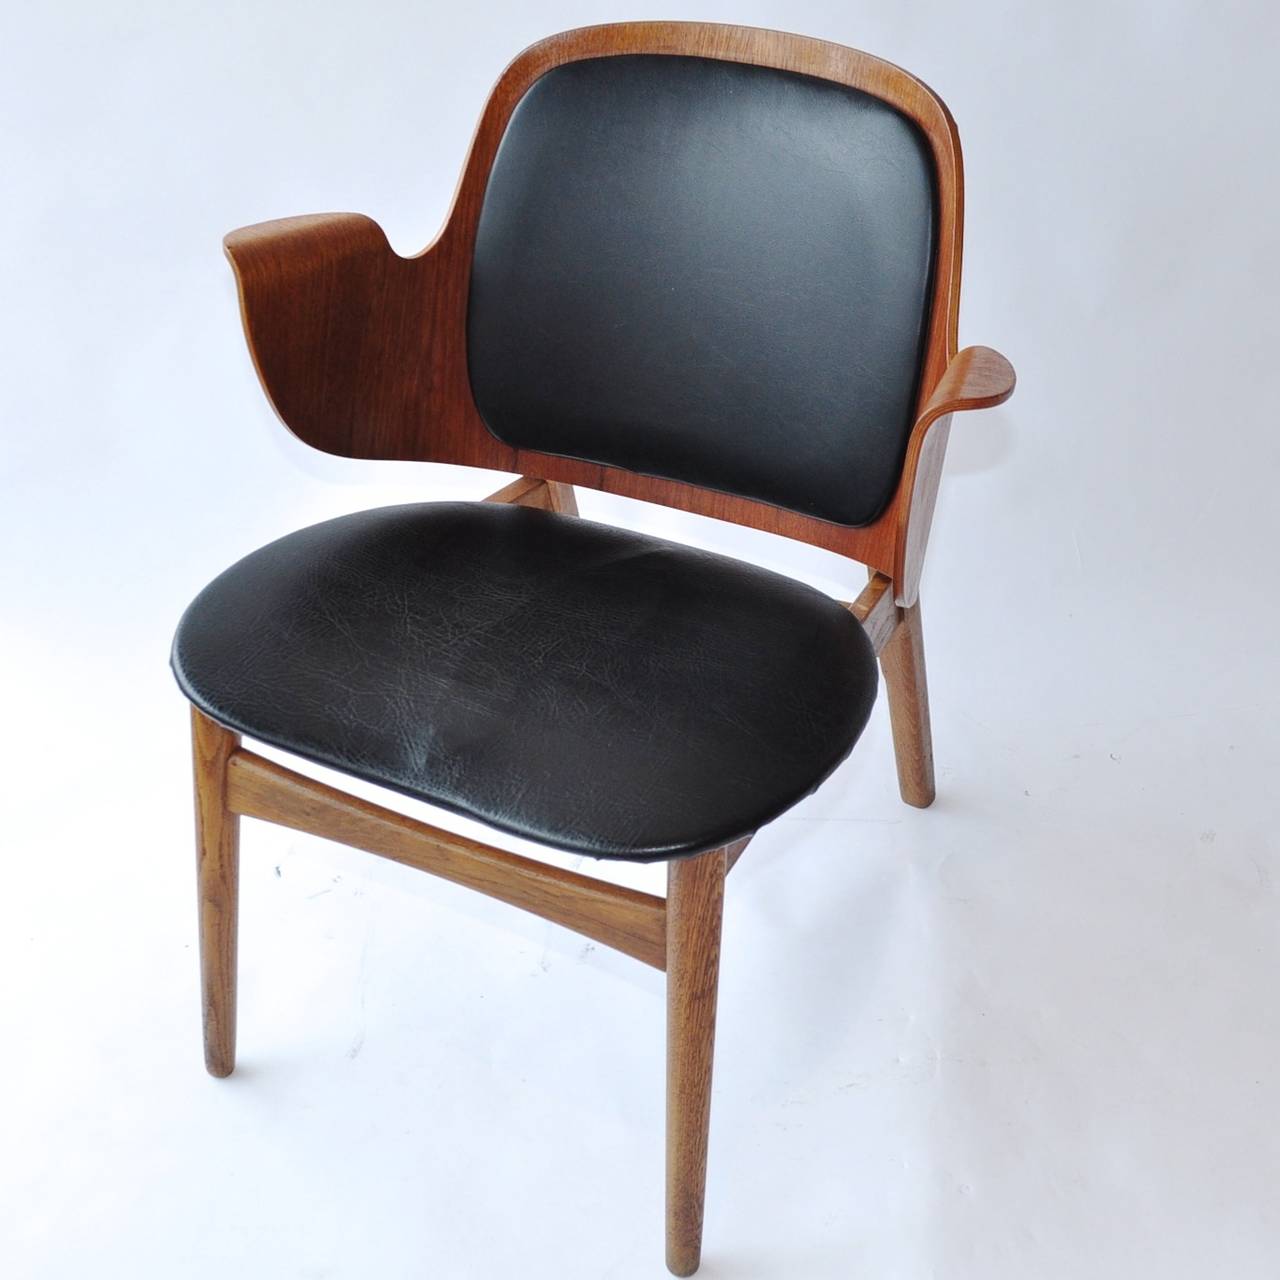 This extremely rare shell chair by Danish modern designer Hans Olsen for Bramin Mobler is made of bent plywood. The chair has two black leather pads.